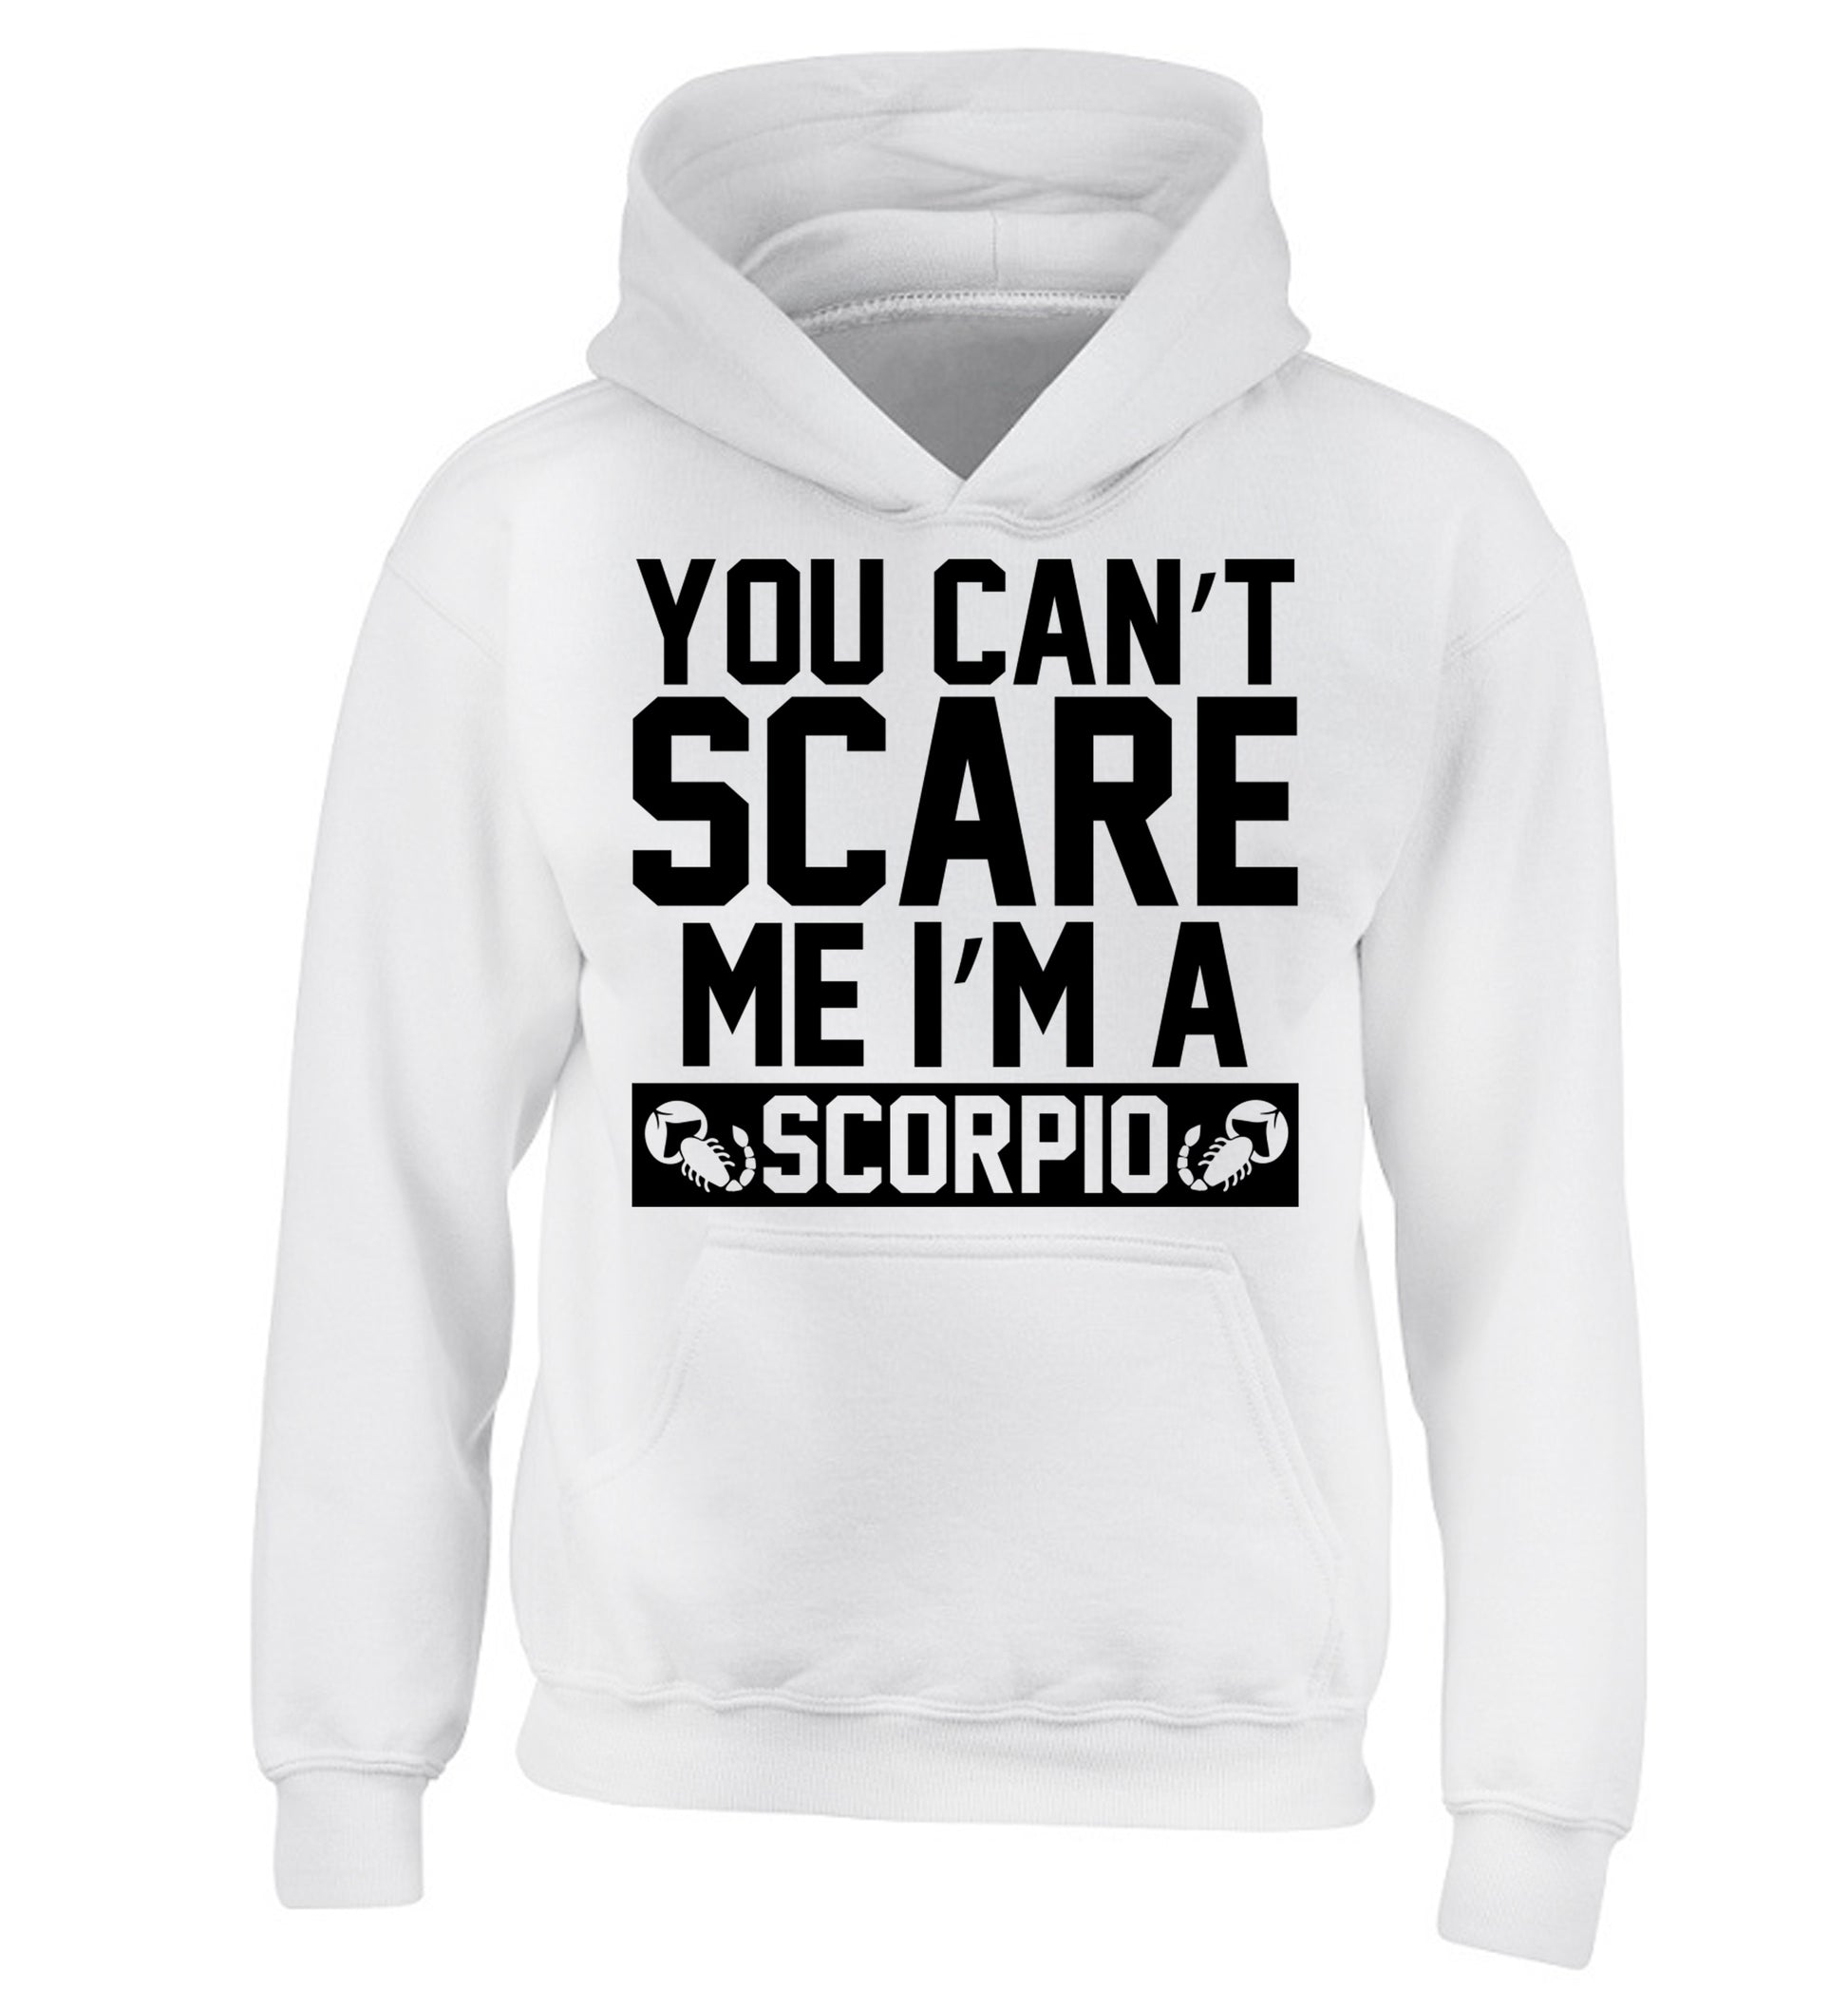 You can't scare me I'm a scorpio children's white hoodie 12-13 Years